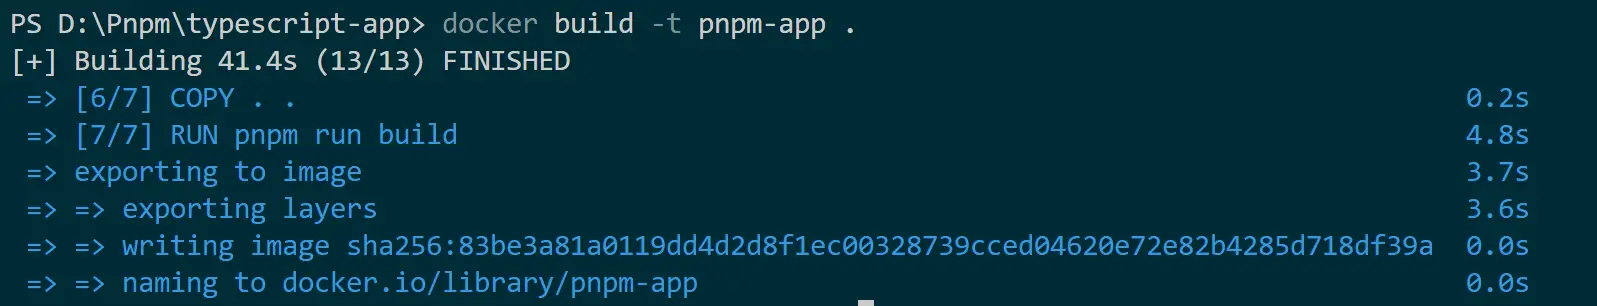 Guide to Pnpm and Docker with TypeScript and Dockerfile